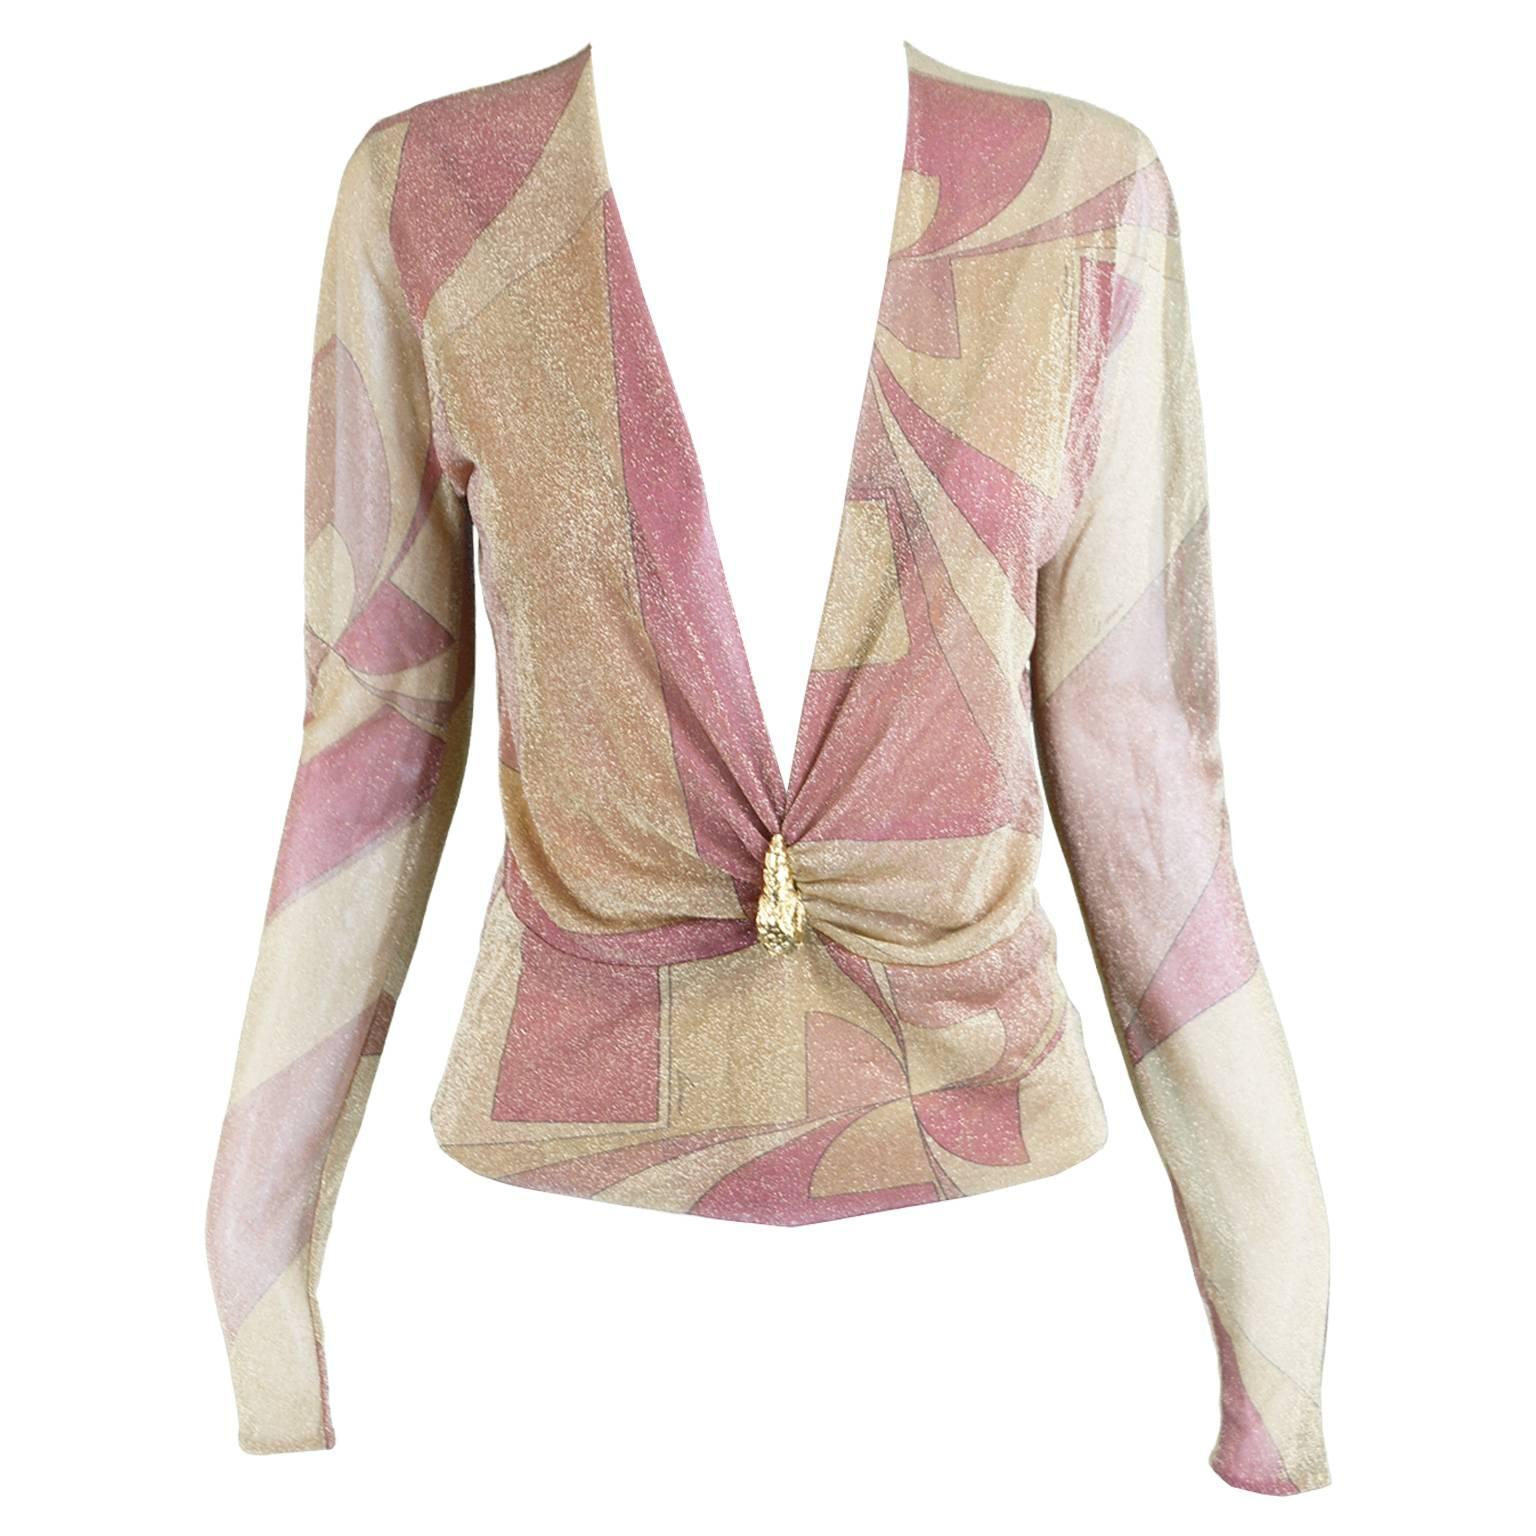 Tom Ford for Gucci Plunging Neckline Gold and Pink Lurex Blouse, A / W 2000